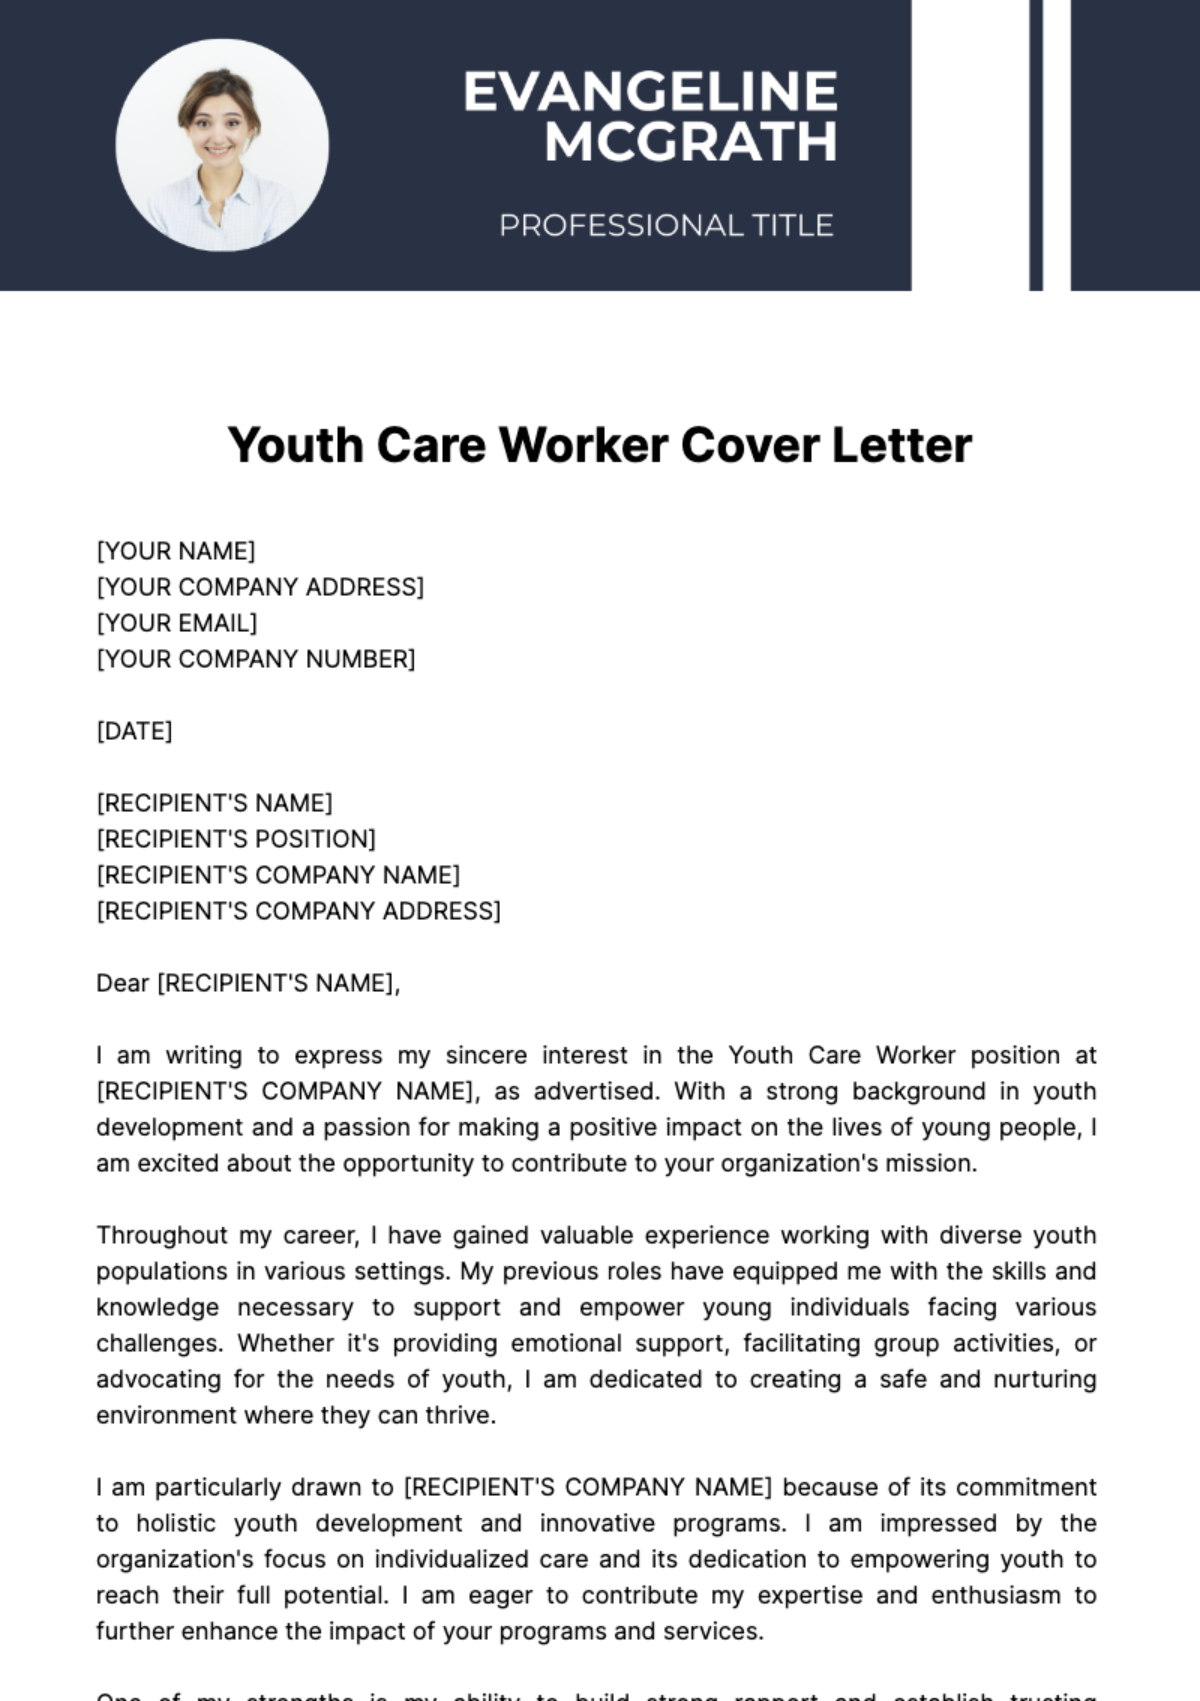 Free Youth Care Worker Cover Letter Template